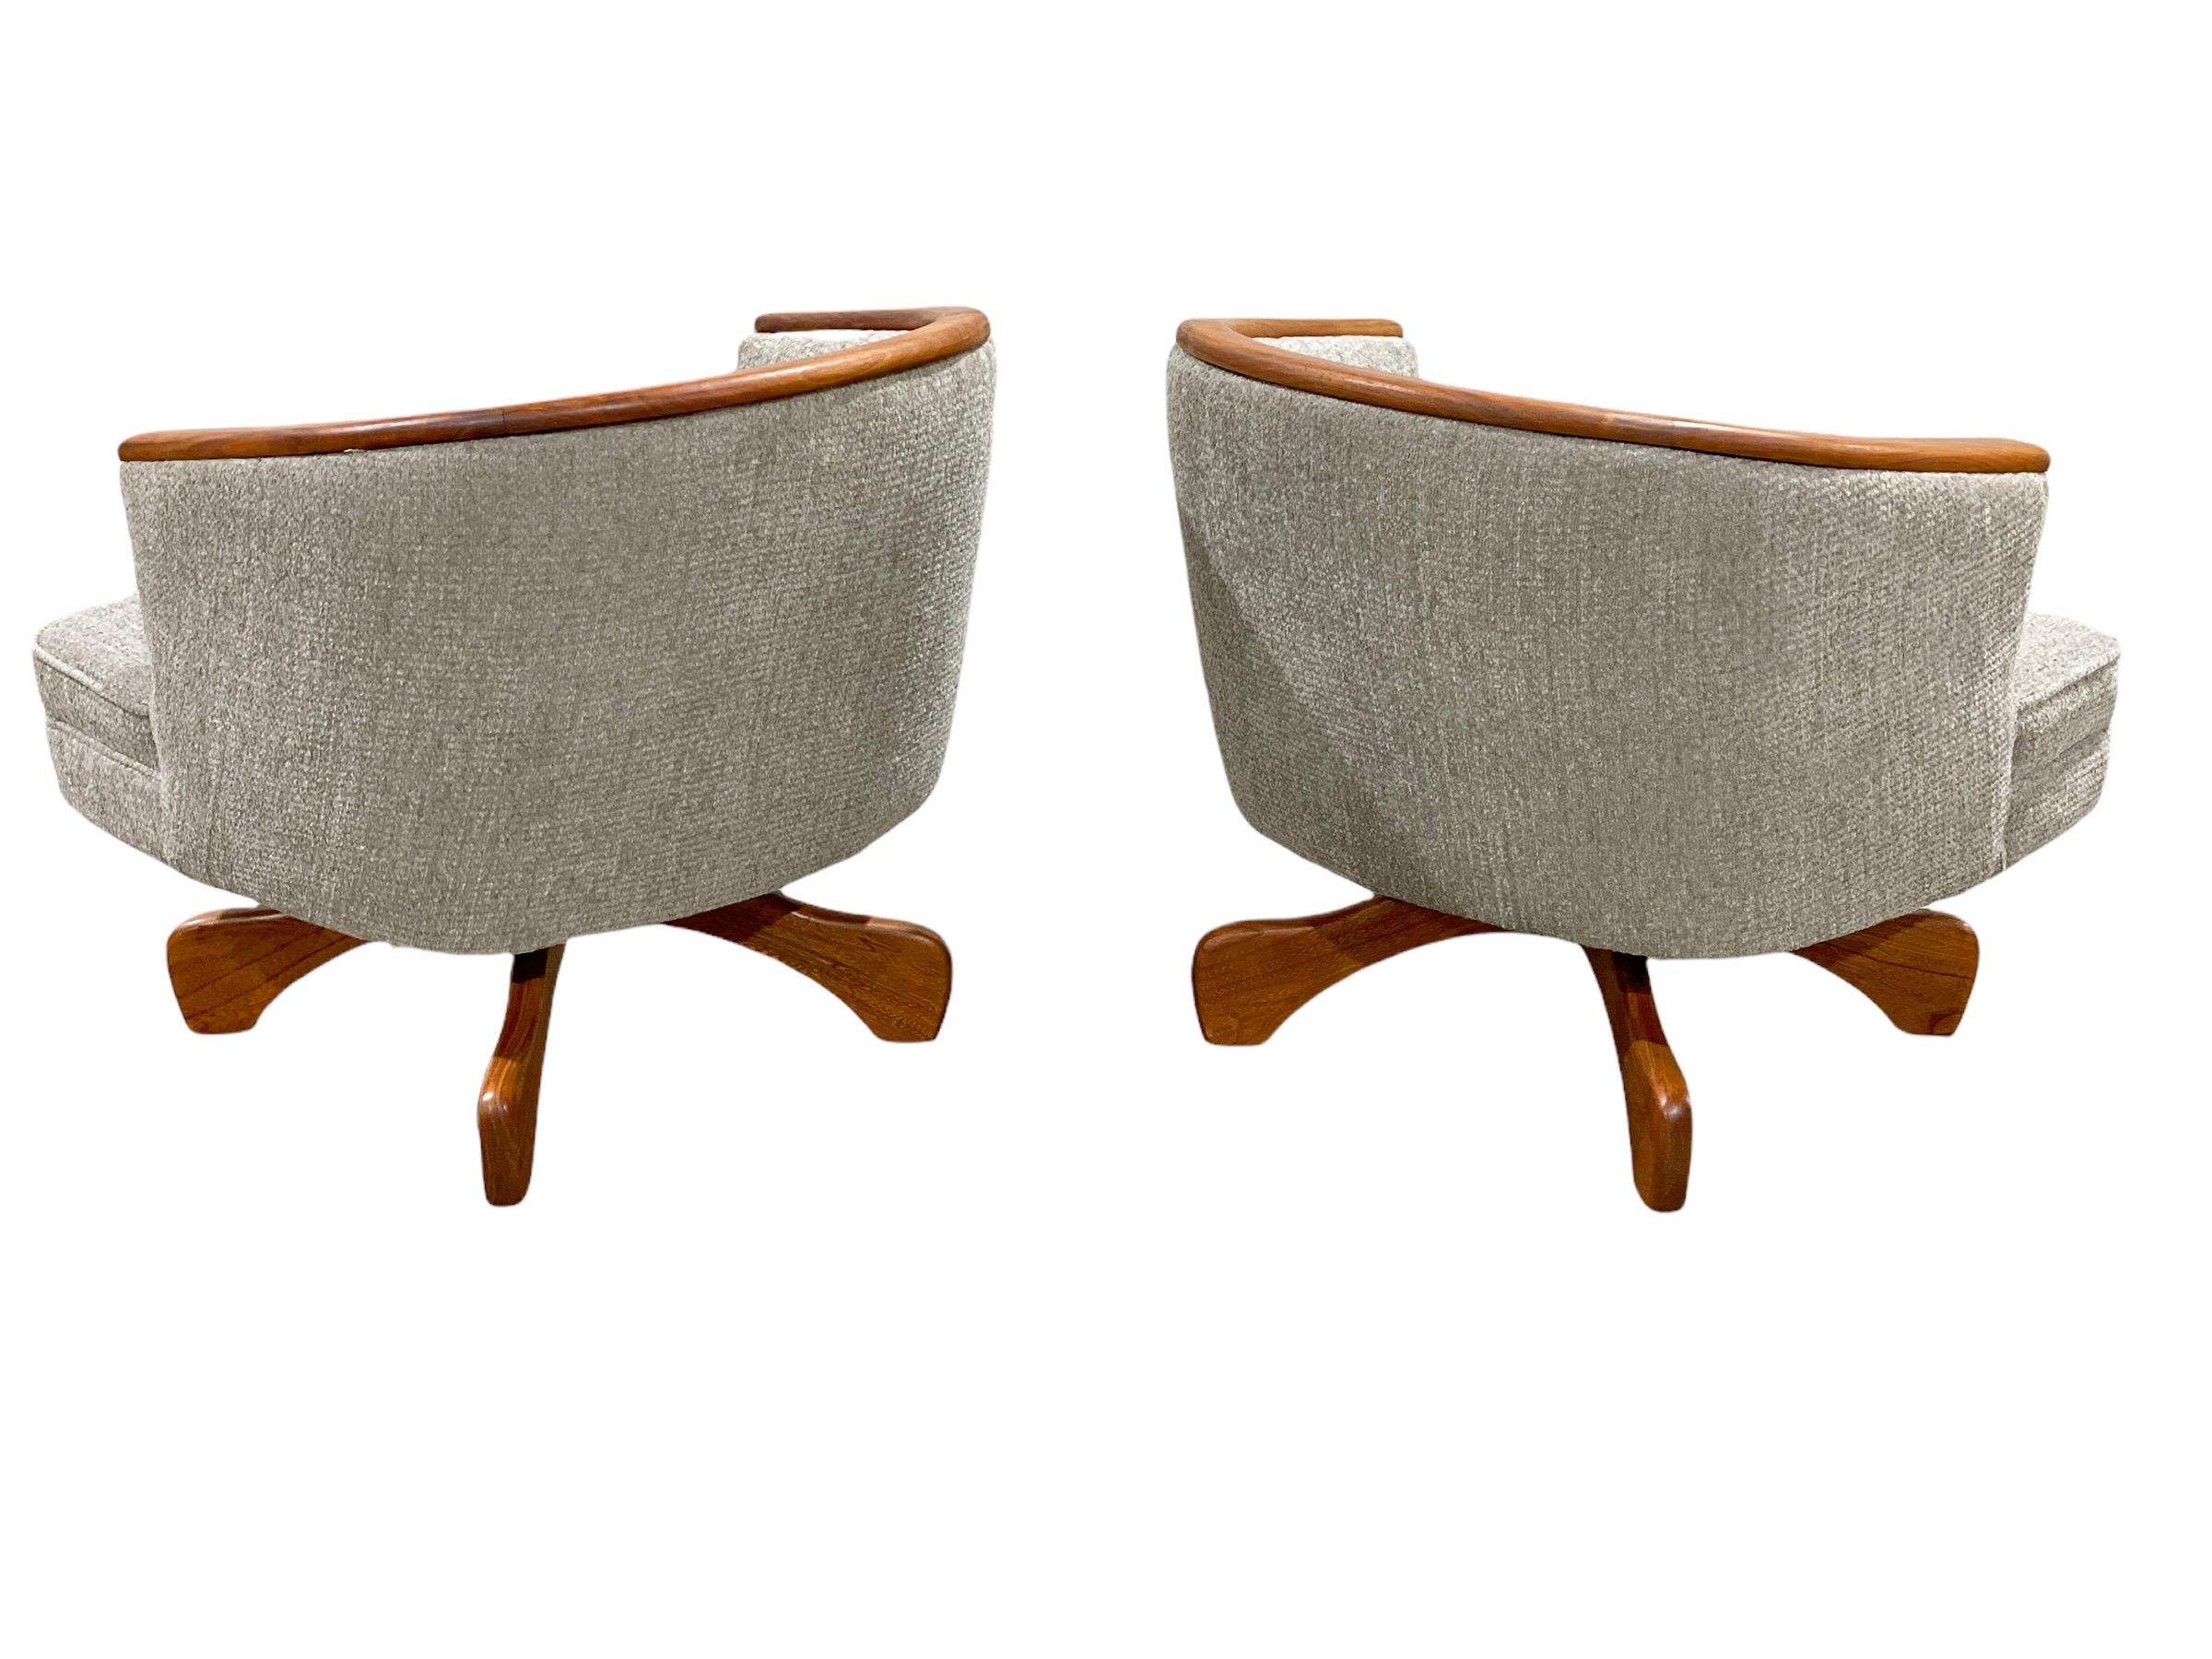 Bouclé Midcentury Swivel Club Barrel Chairs After Adrian Pearsall, Walnut + Boucle